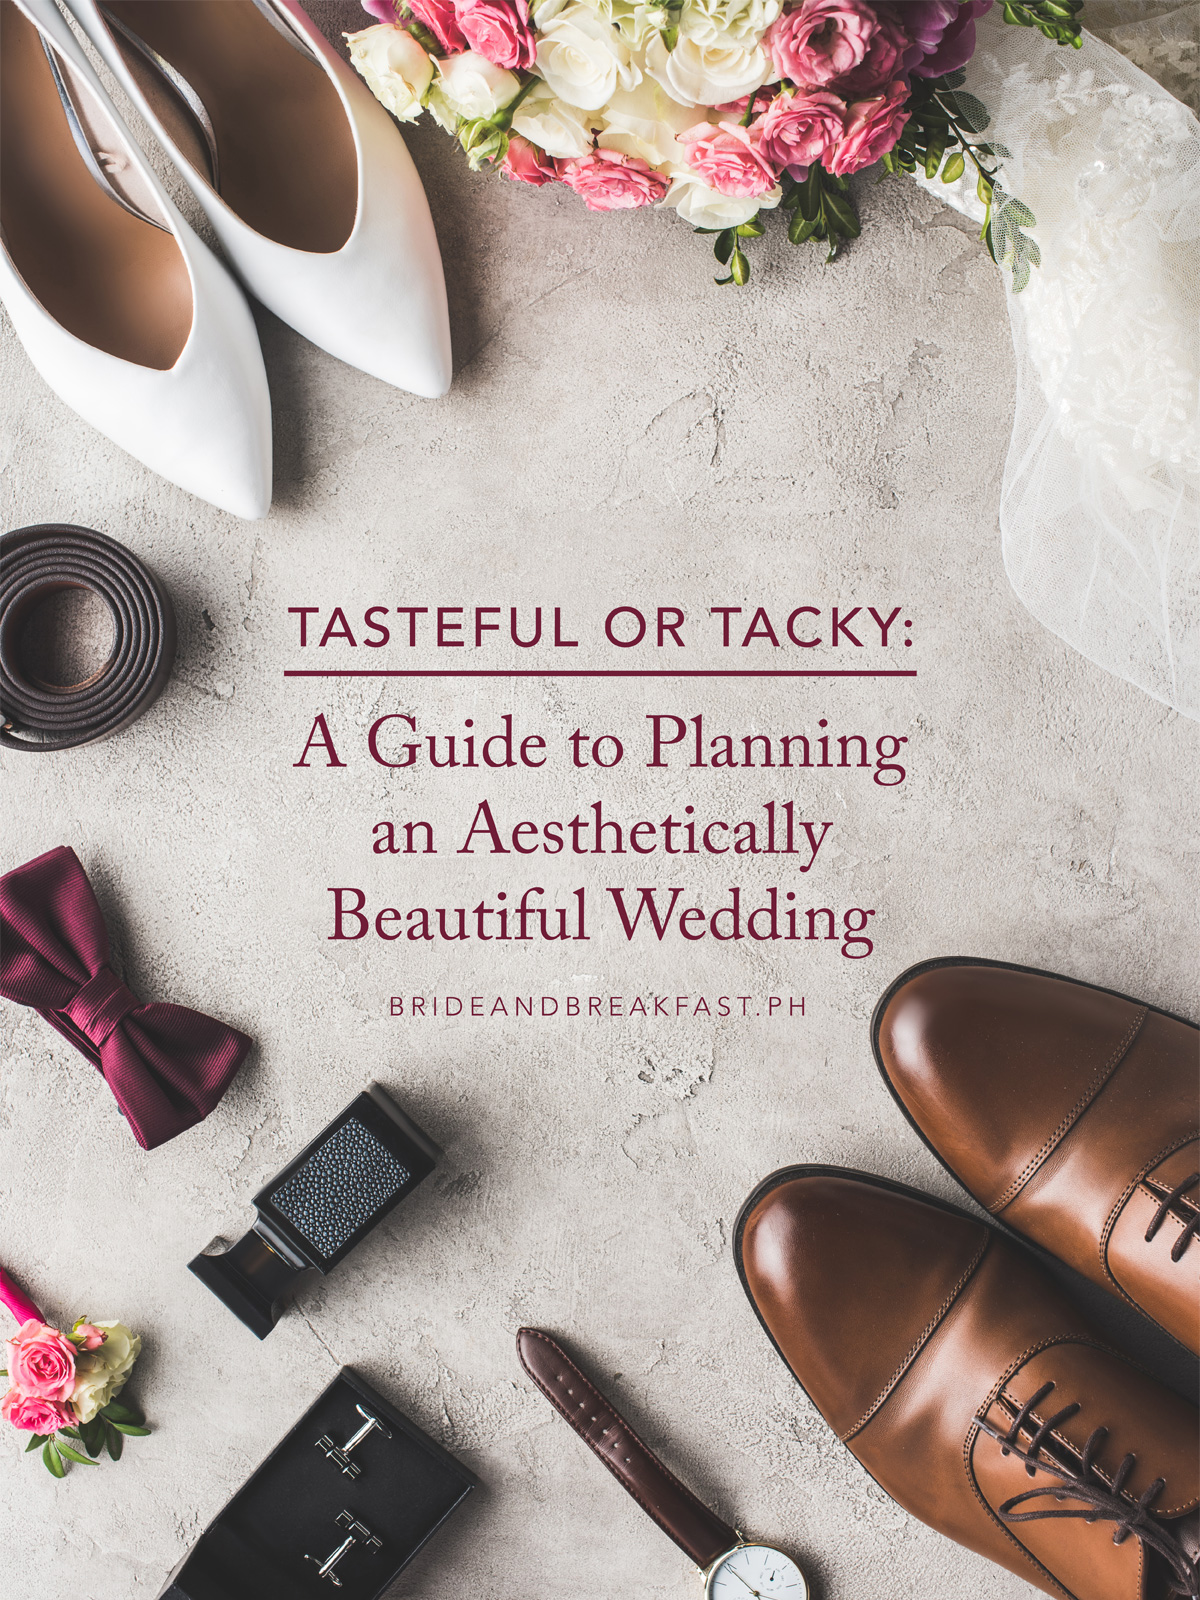 Tasteful or Tacky: A Guide to Planning an Aesthetically Beautiful Wedding